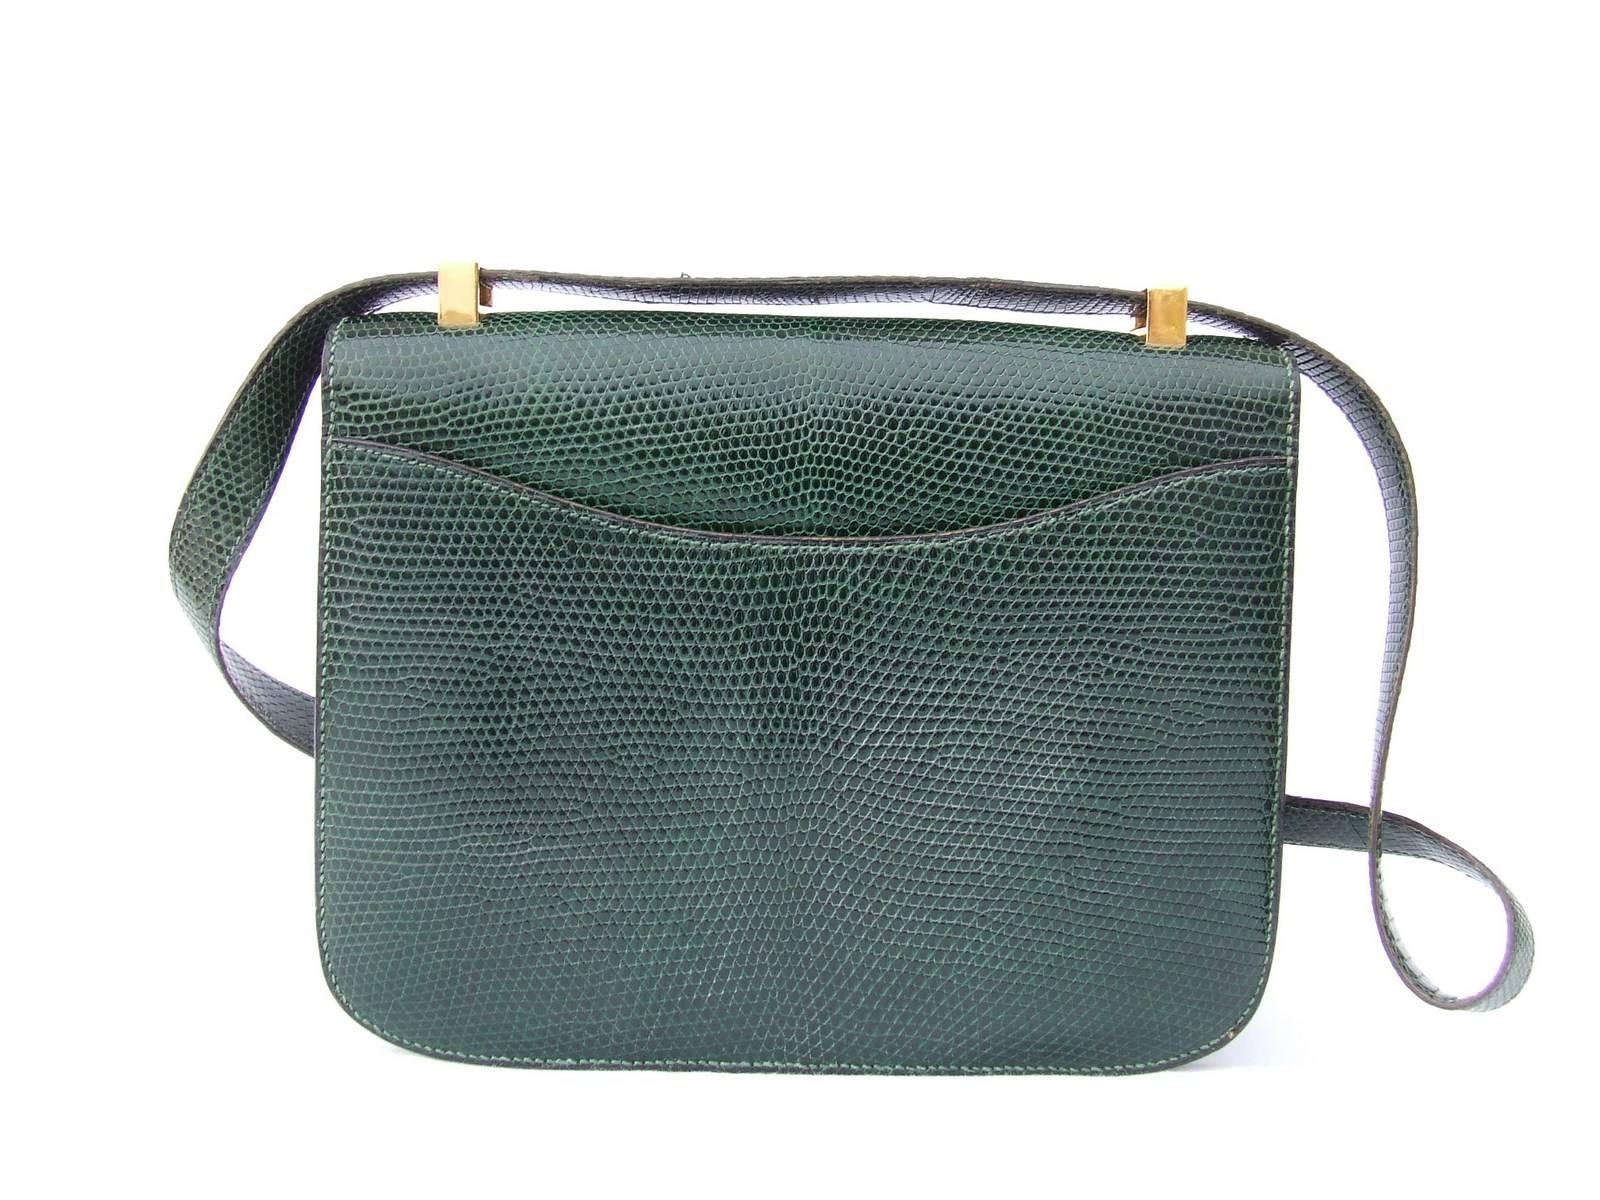 GORGEOUS AUTHENTIC VINTAGE HERMES FLAP BAG

CONSTANCE

Made in France

Stamp E in a circle

Made of Lizard Skin and Golden Hardware

Colorway: Emeral Green

Lined with dark green smooth leather

1 main pocket, 1 zippered pocket (zip